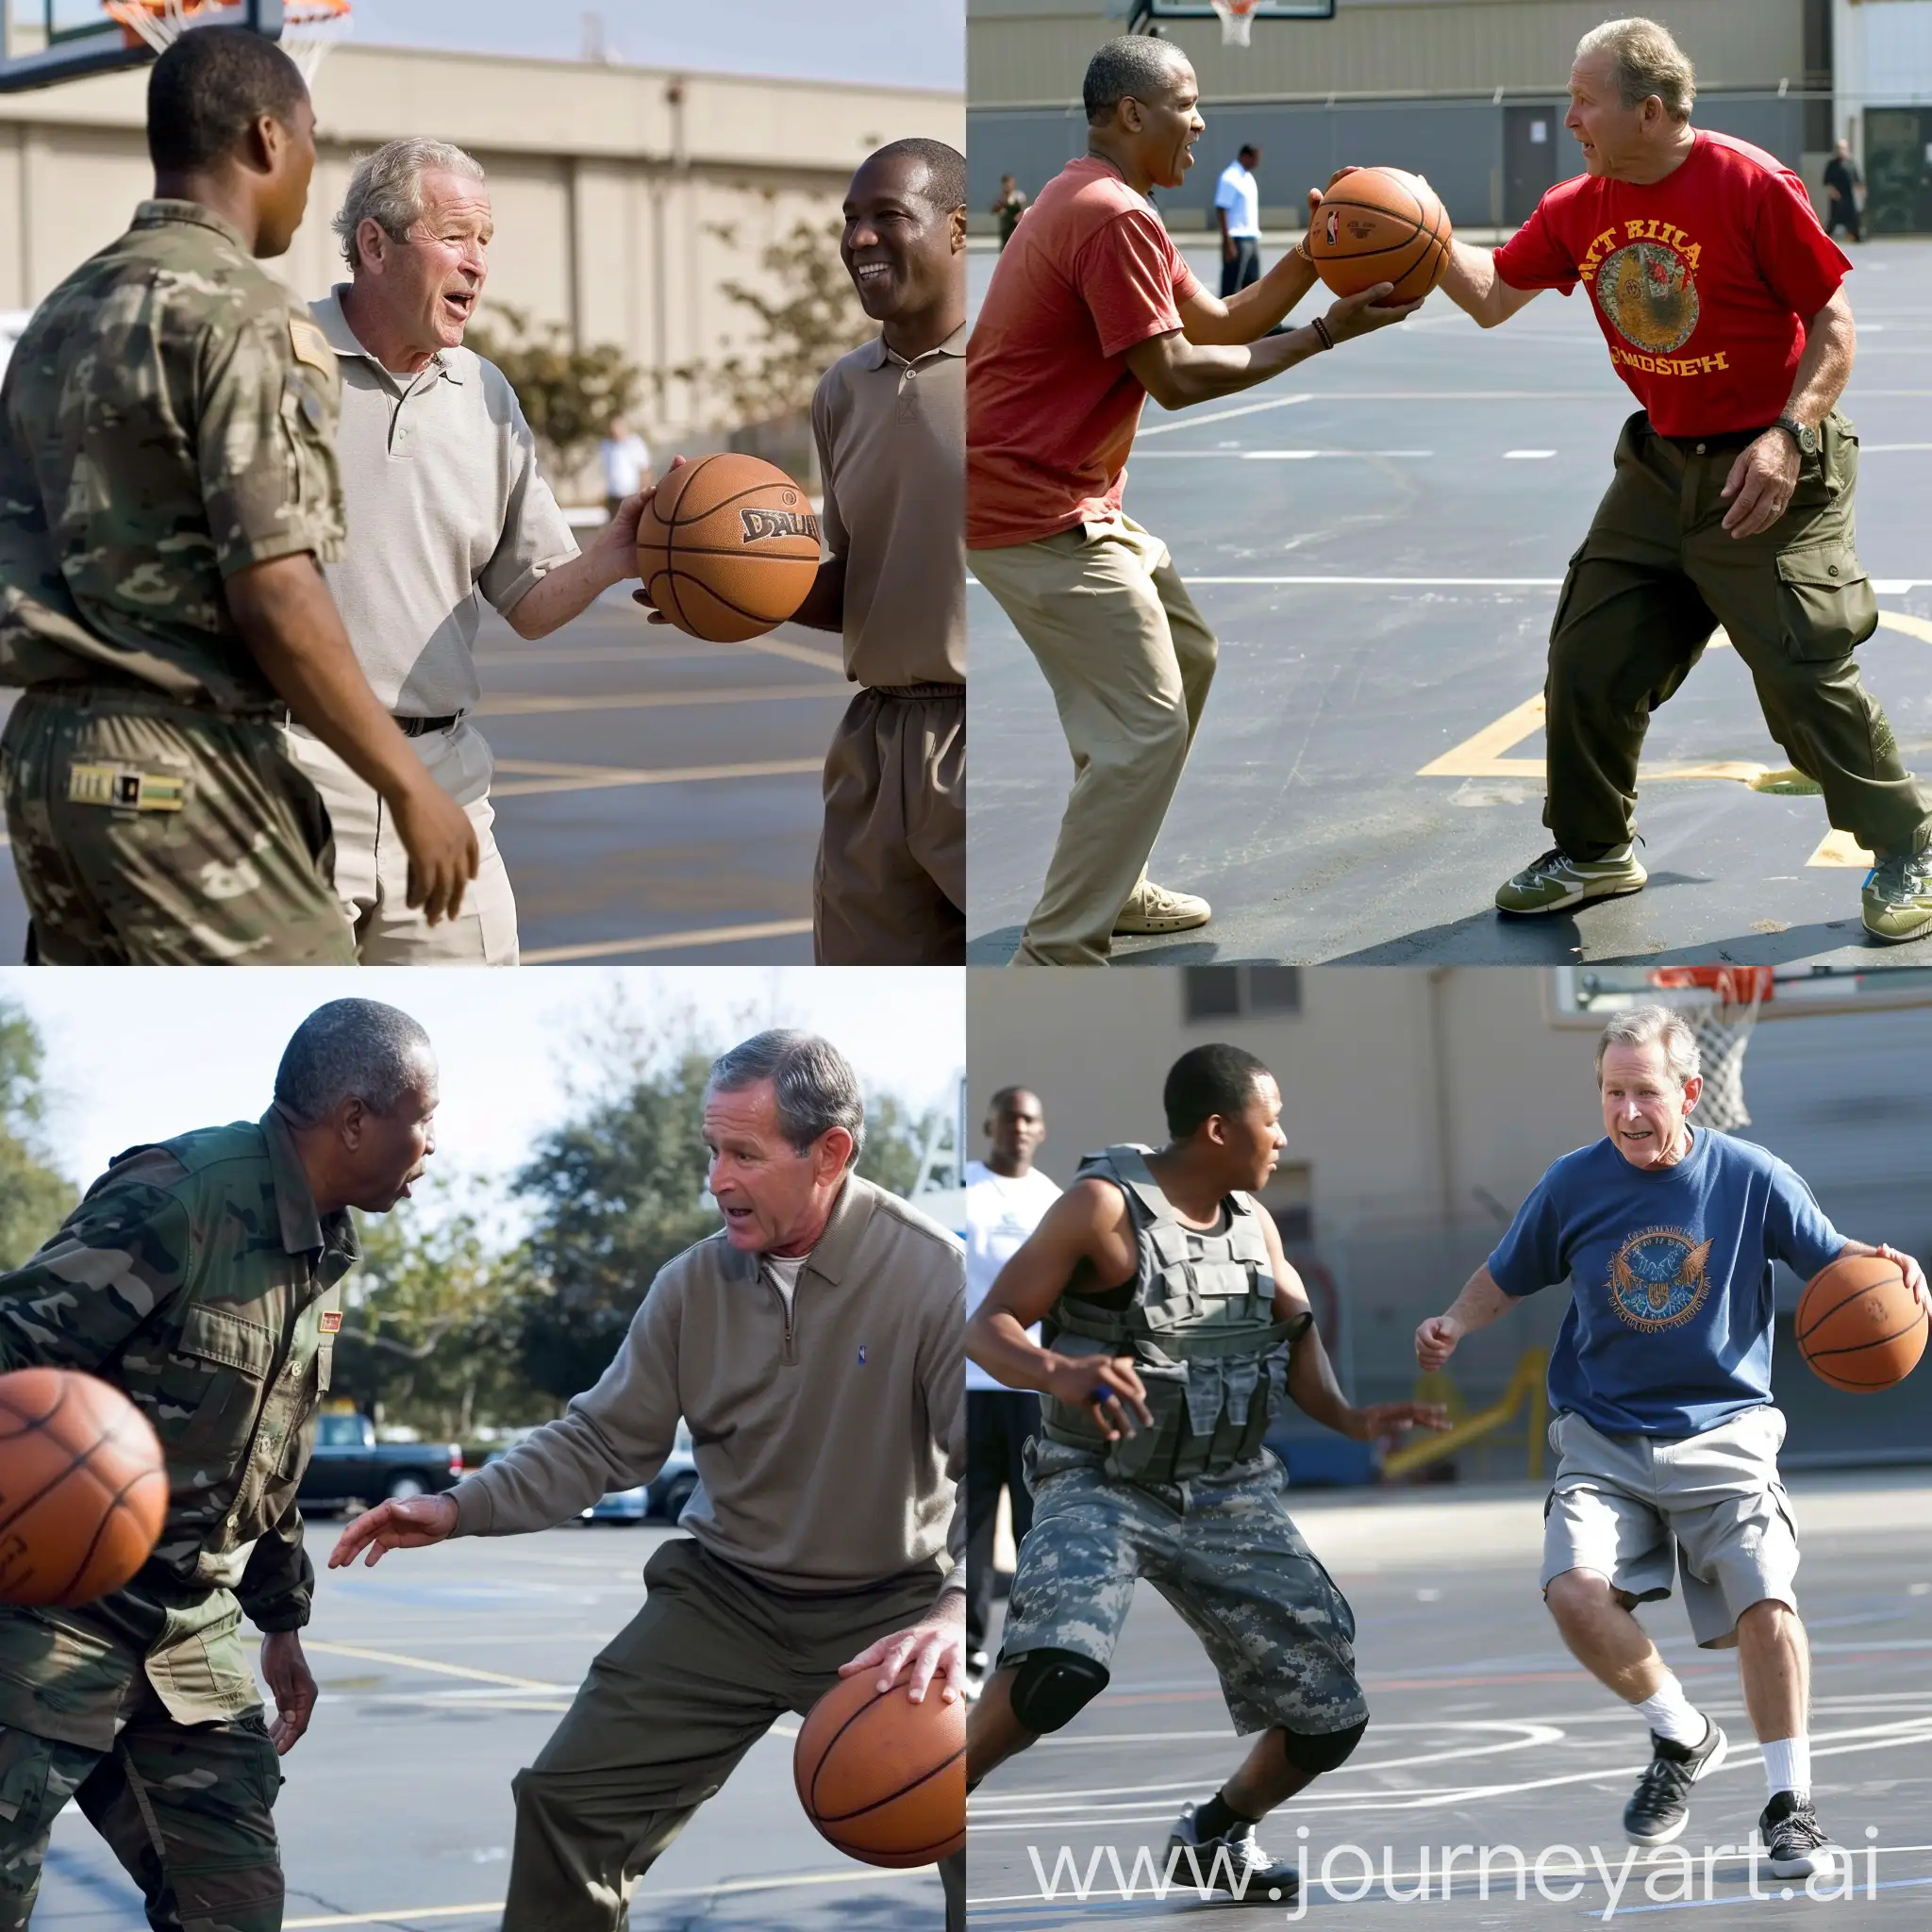 Former-President-George-Bush-Playing-Basketball-with-Master-Chief-in-Parking-Lot